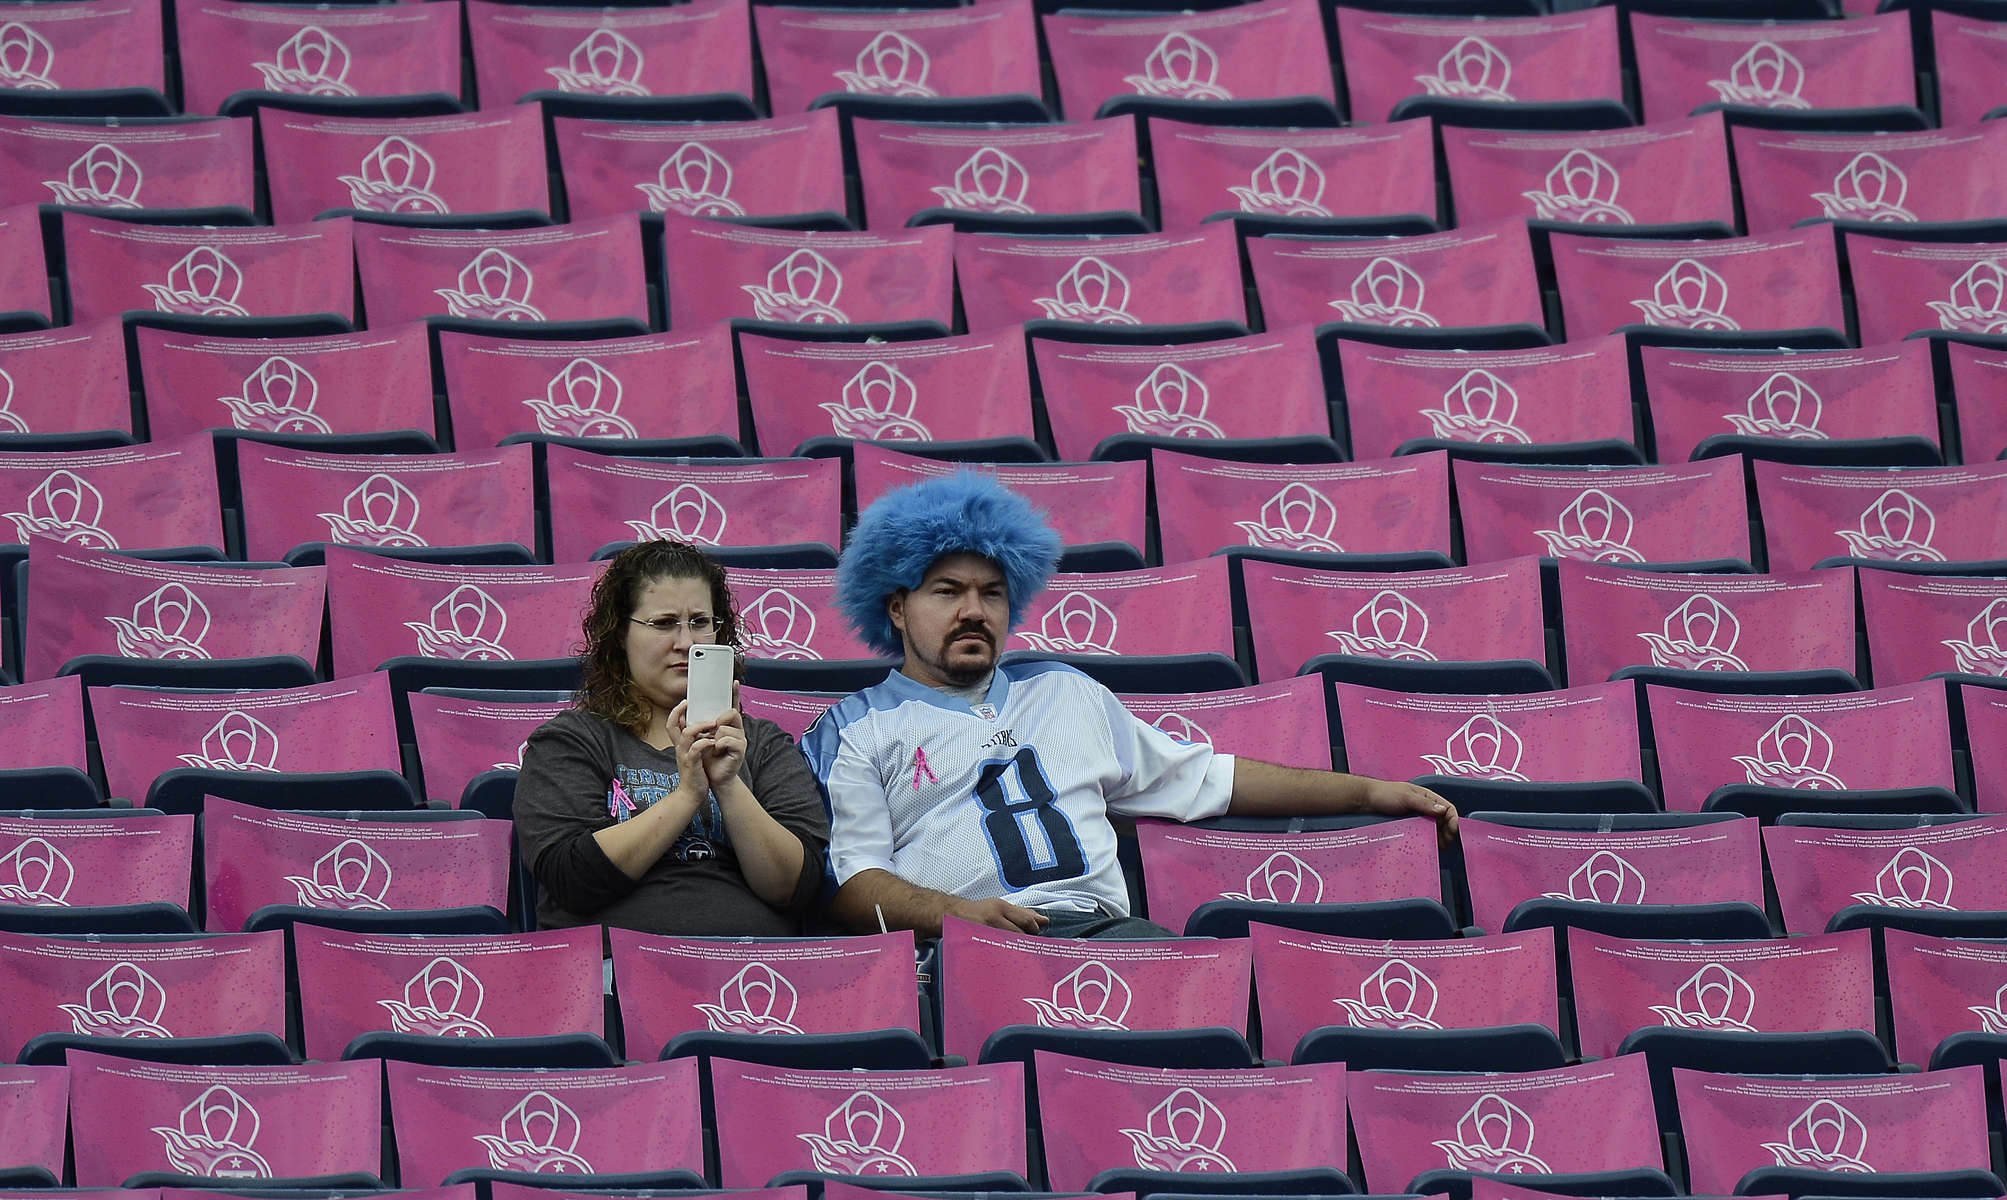 Tennessee Titans fans sit among breast cancer awareness posters before an NFL football game between the Titans and the Kansas City Chiefs on Oct. 6, 2013, in Nashville, Tenn. (AP Photo/ Mark Zaleski)